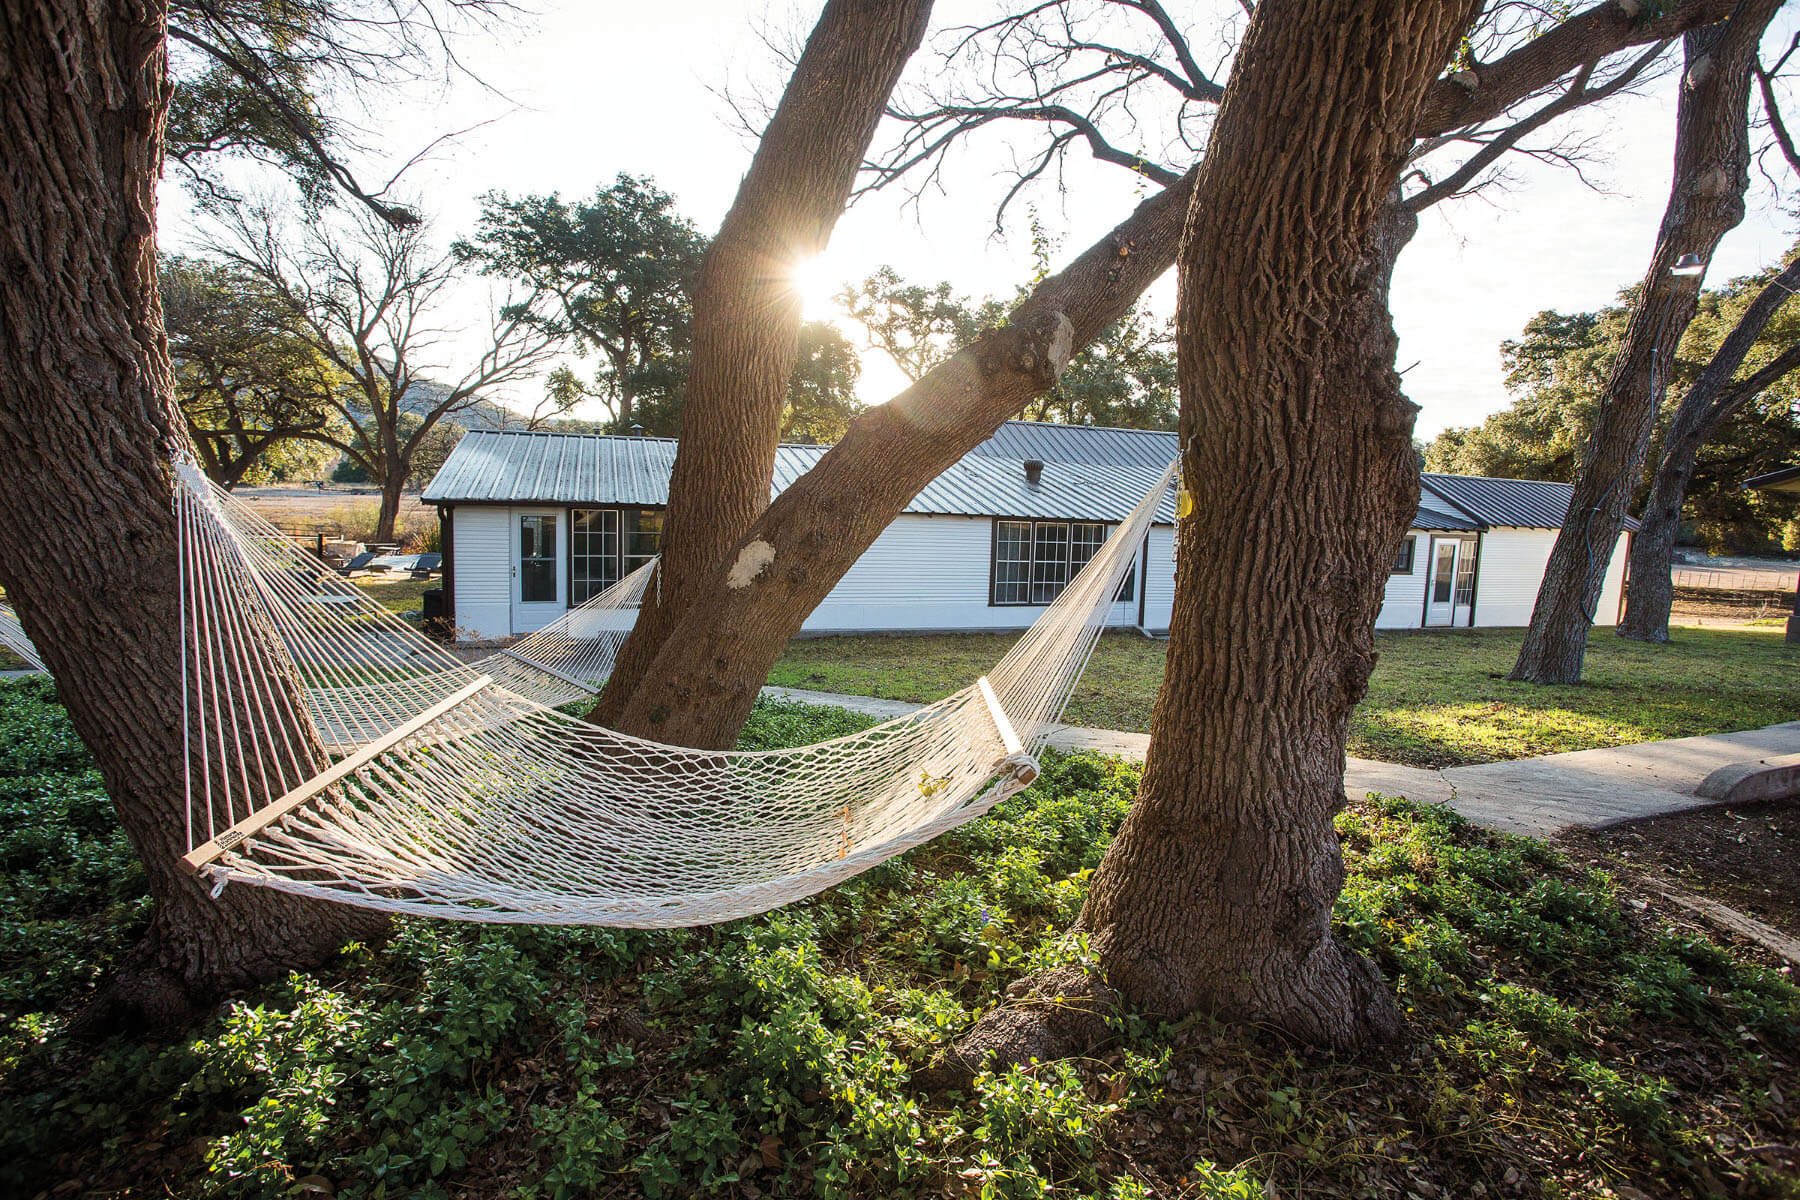 White hammocks hang from trees in front of a white guest house on the ranch